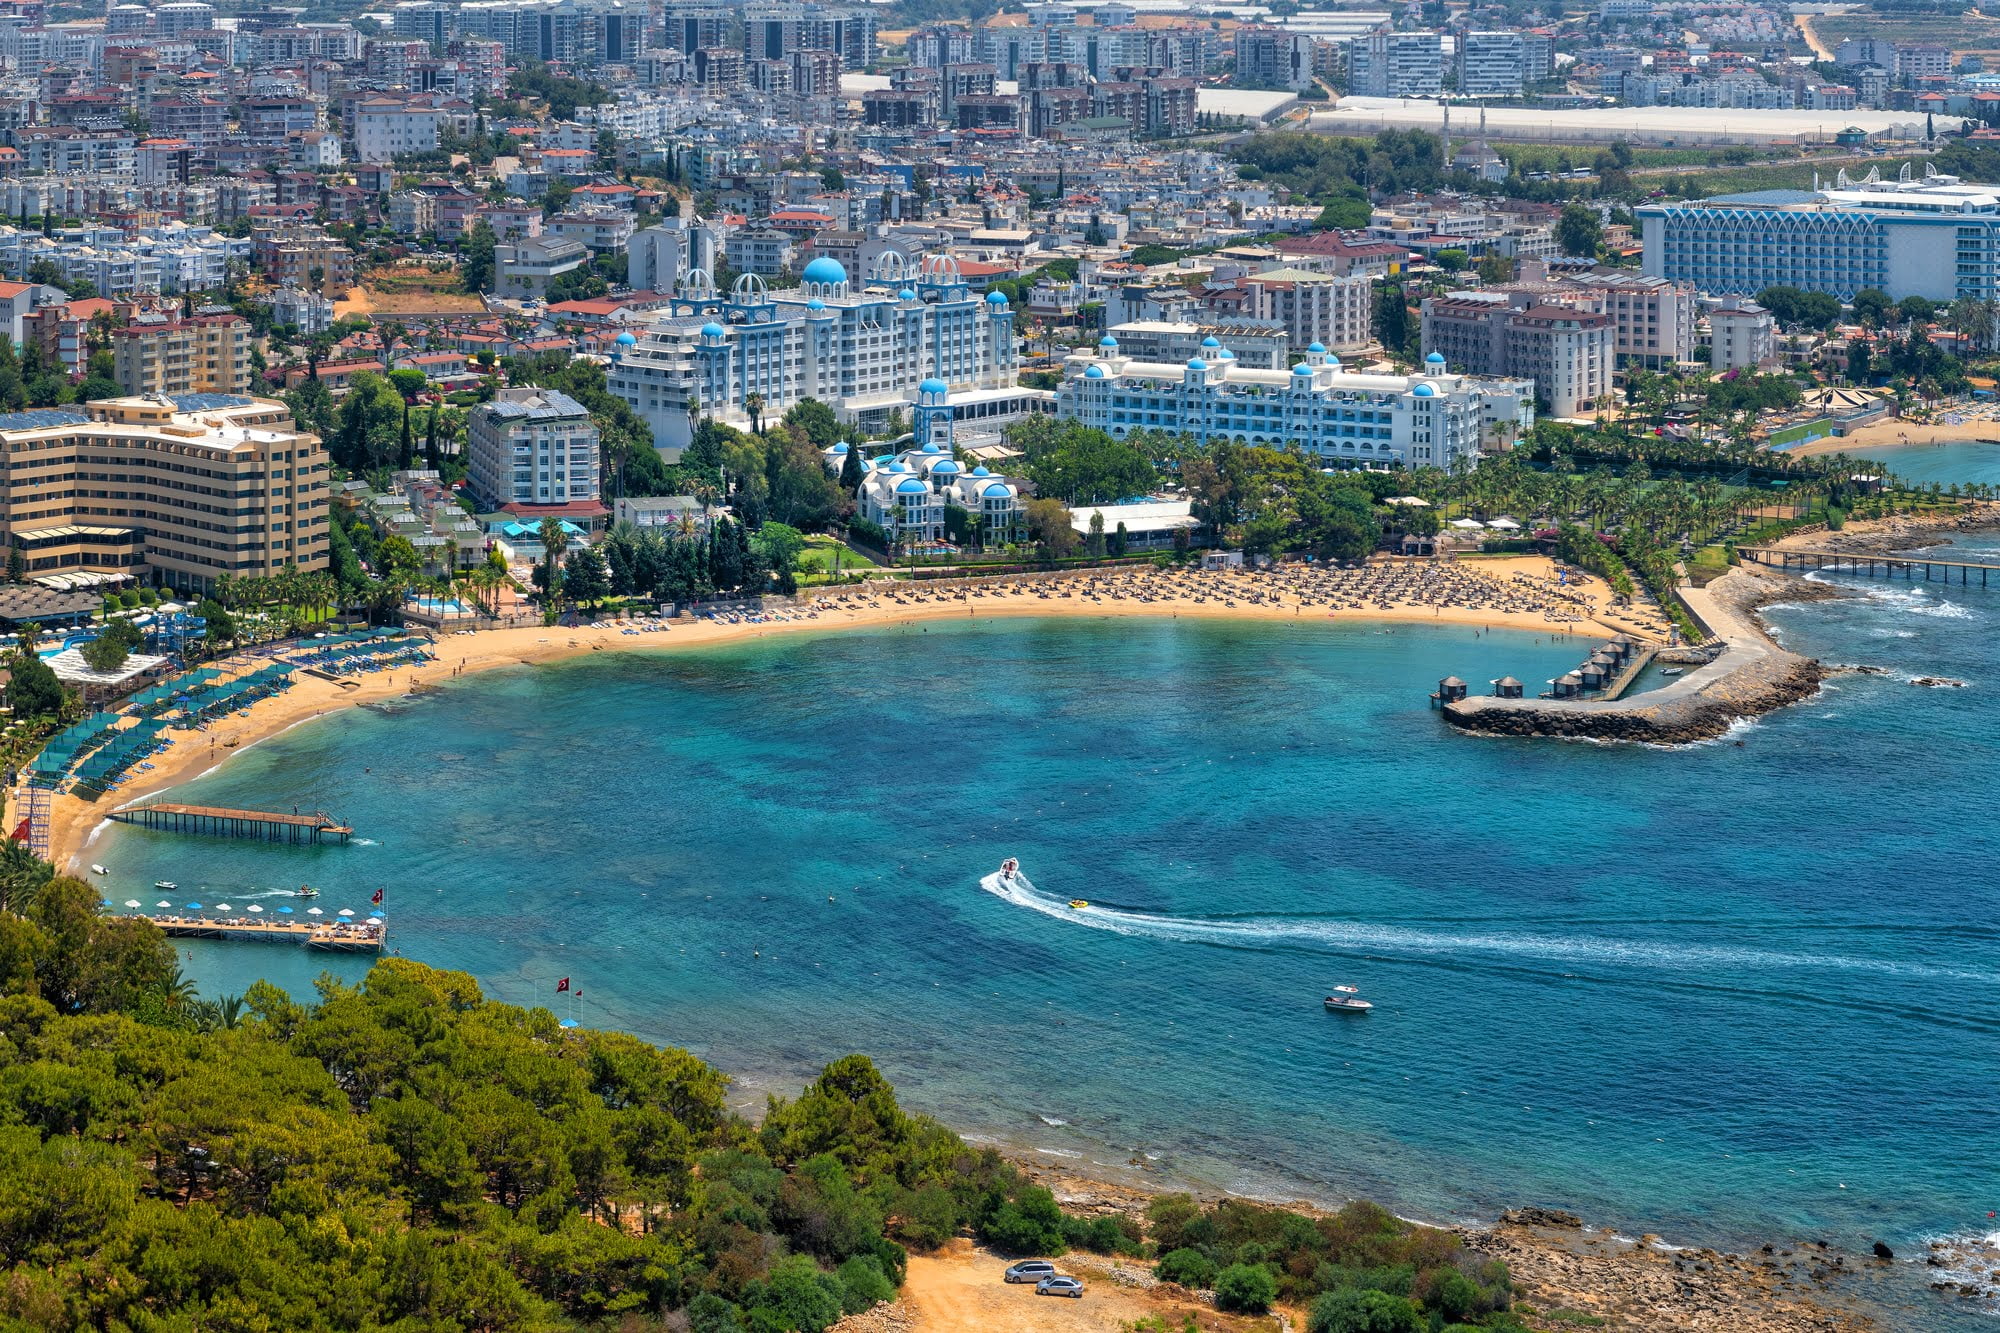 A picturesque Alanya bay with beaches and hotels in the Avsallar region of the Turkish resort